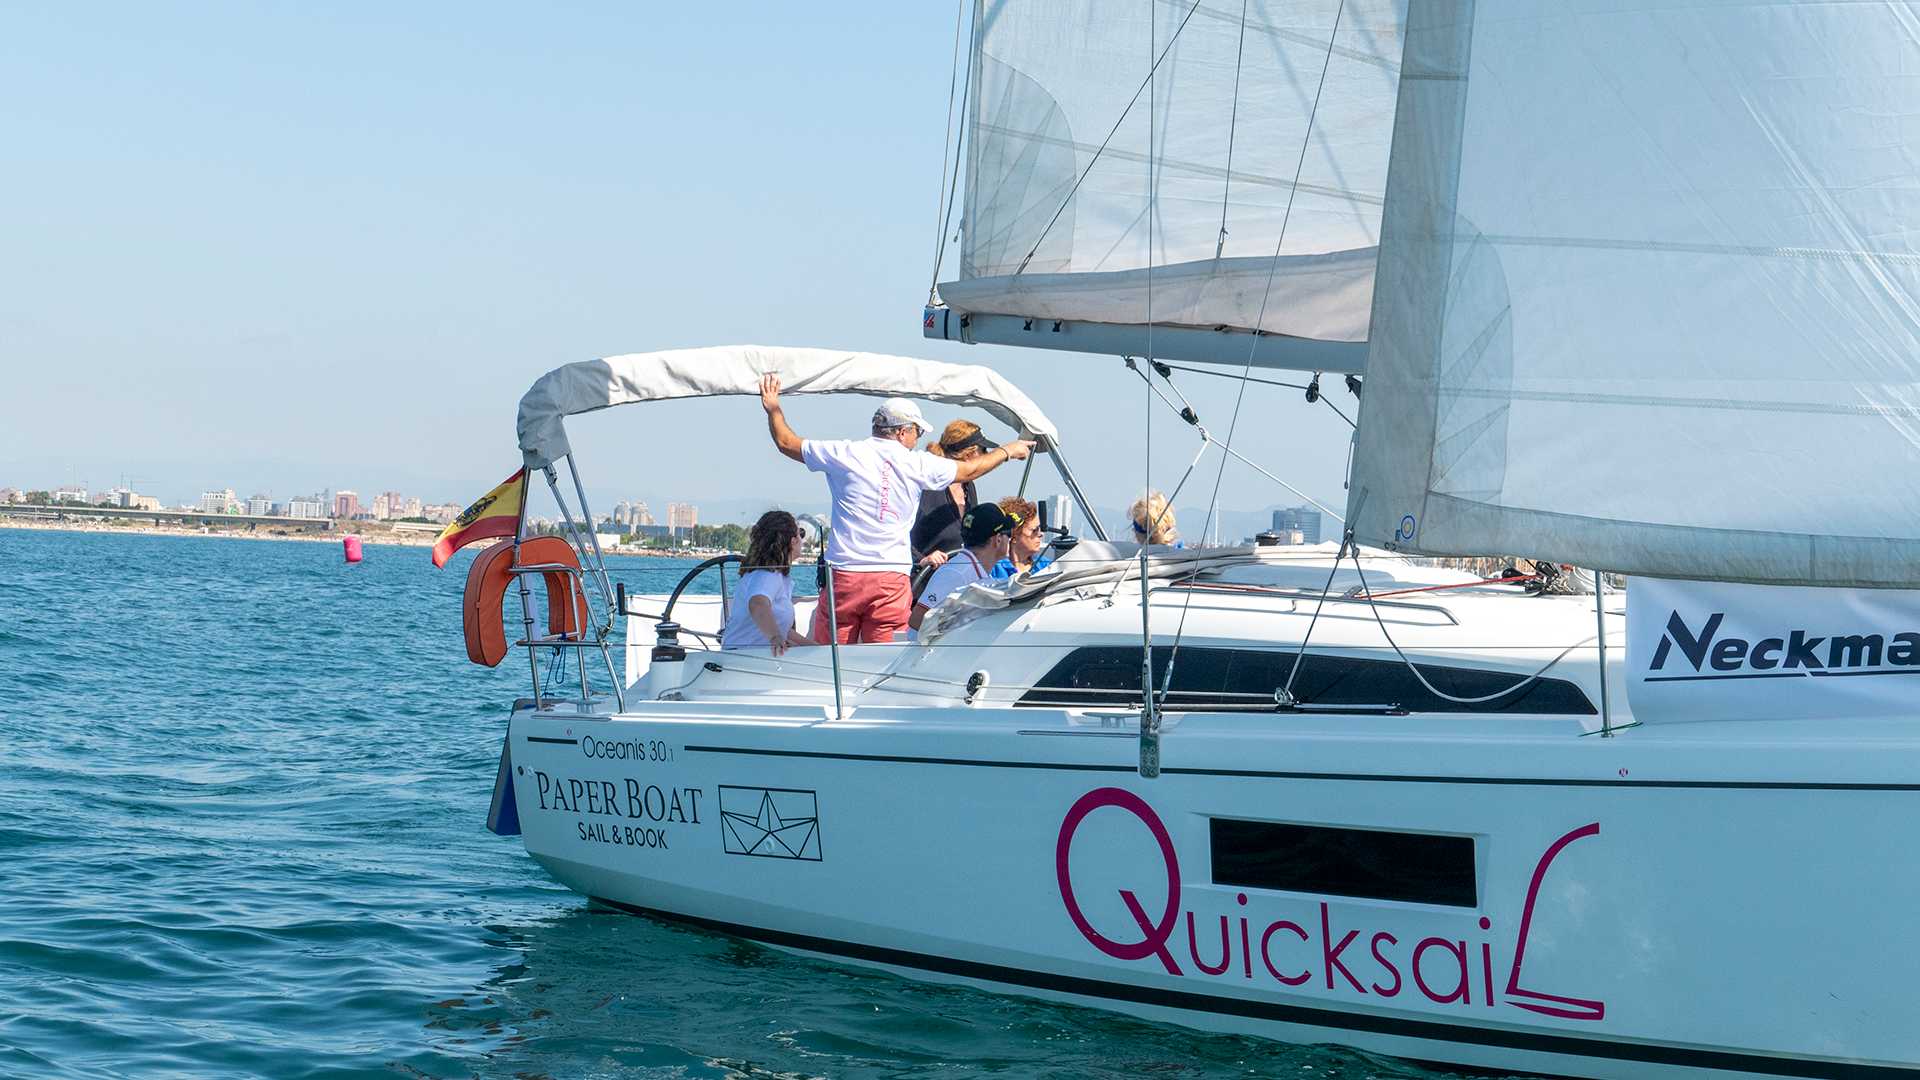 QUICKSAIL EVENTS & YACHT SERVICES